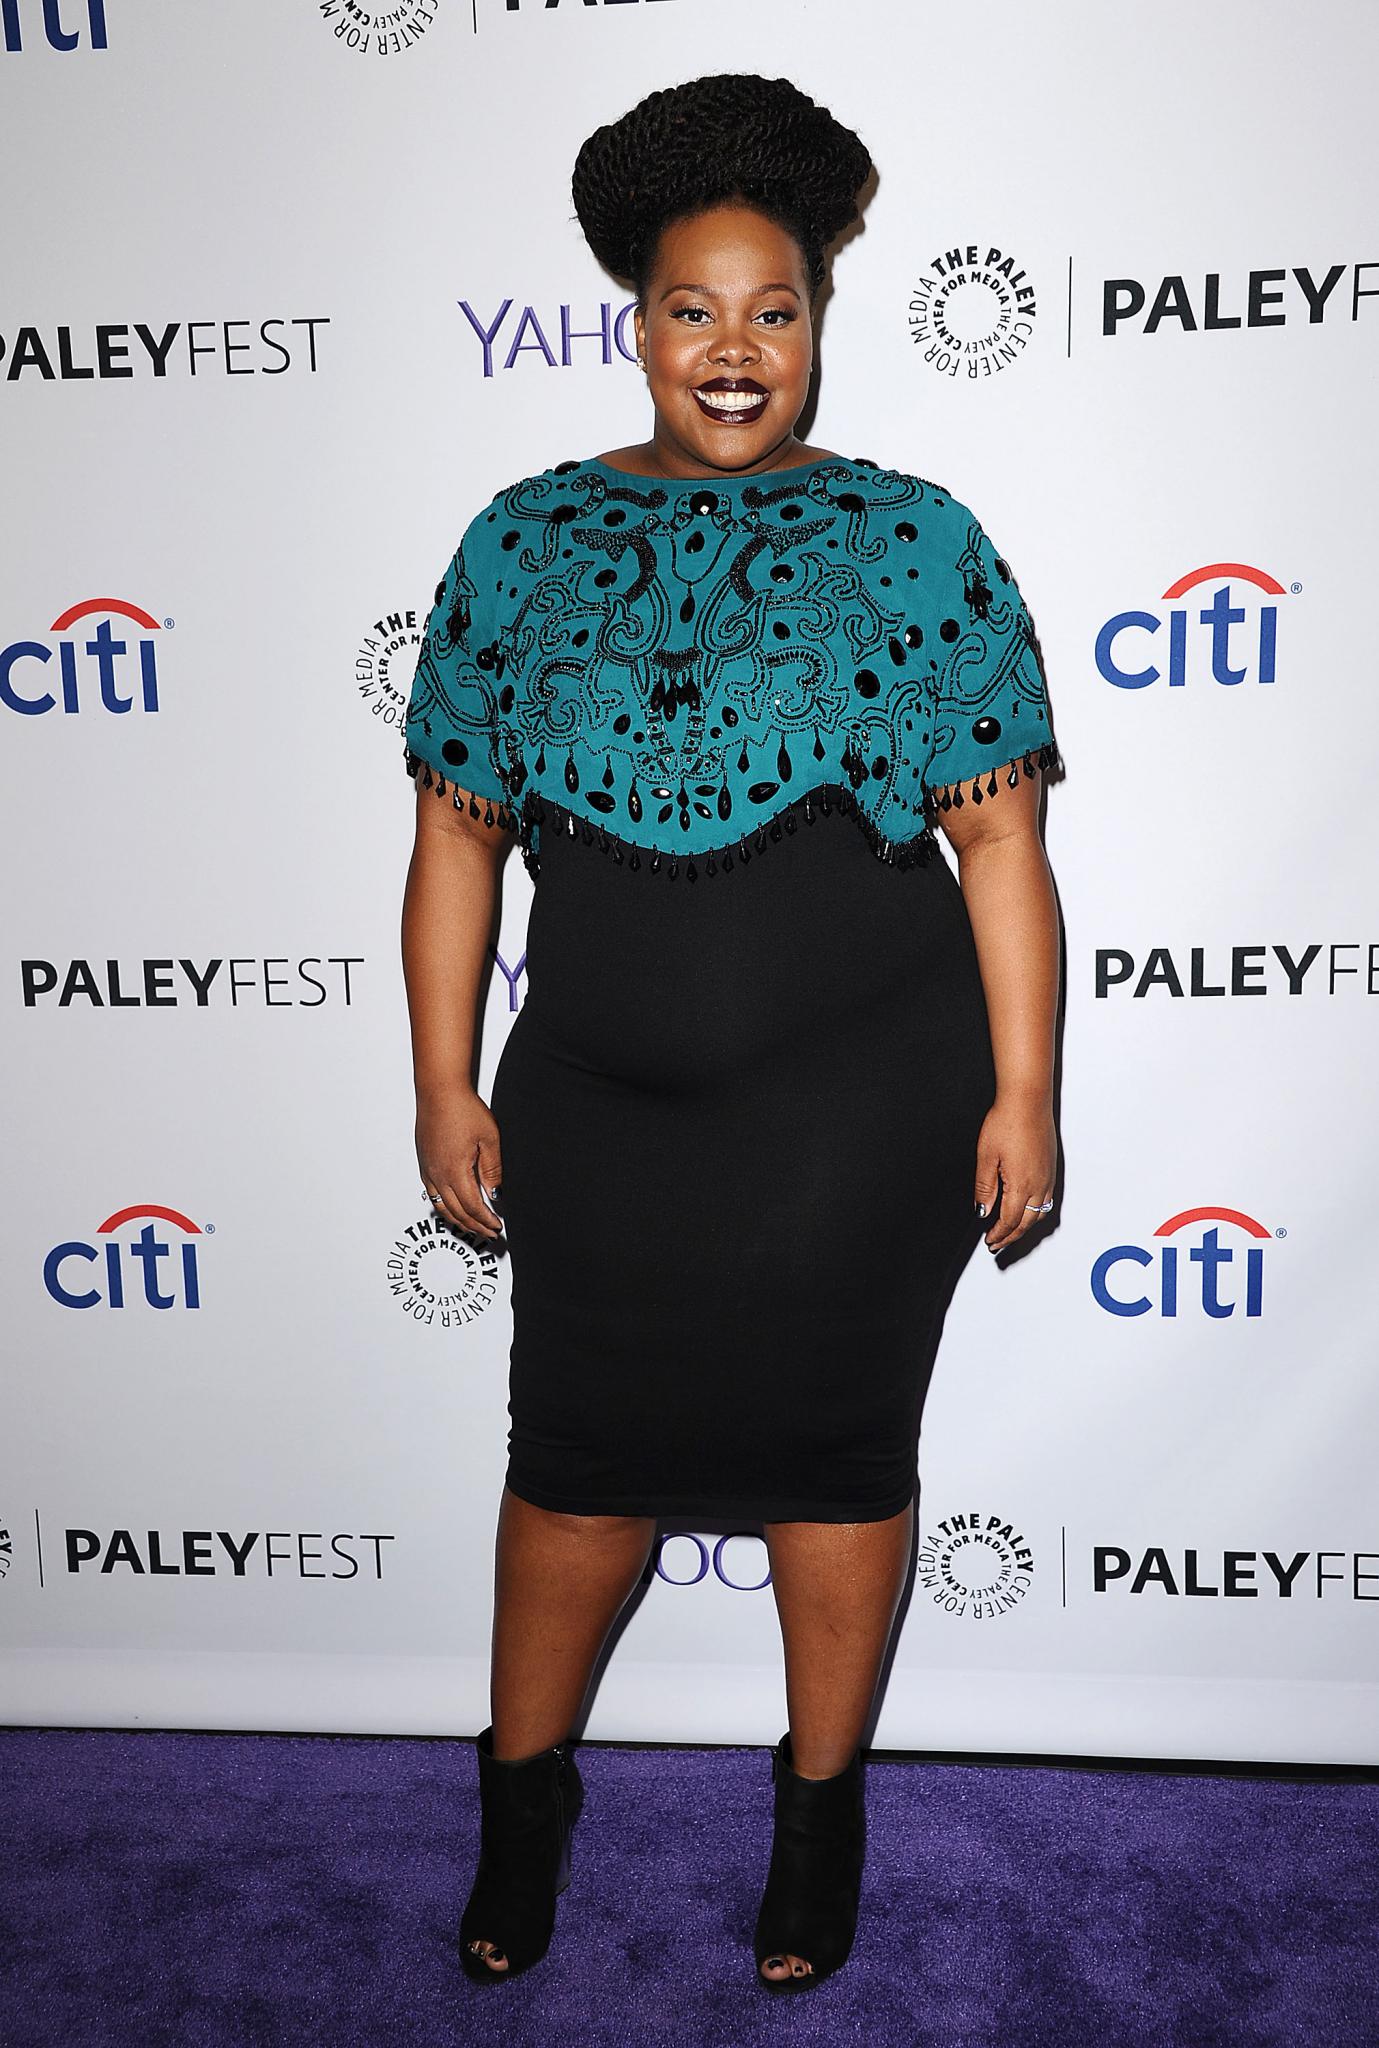 #TeamCurvy's Fiercest Fashion Moments of the Year
